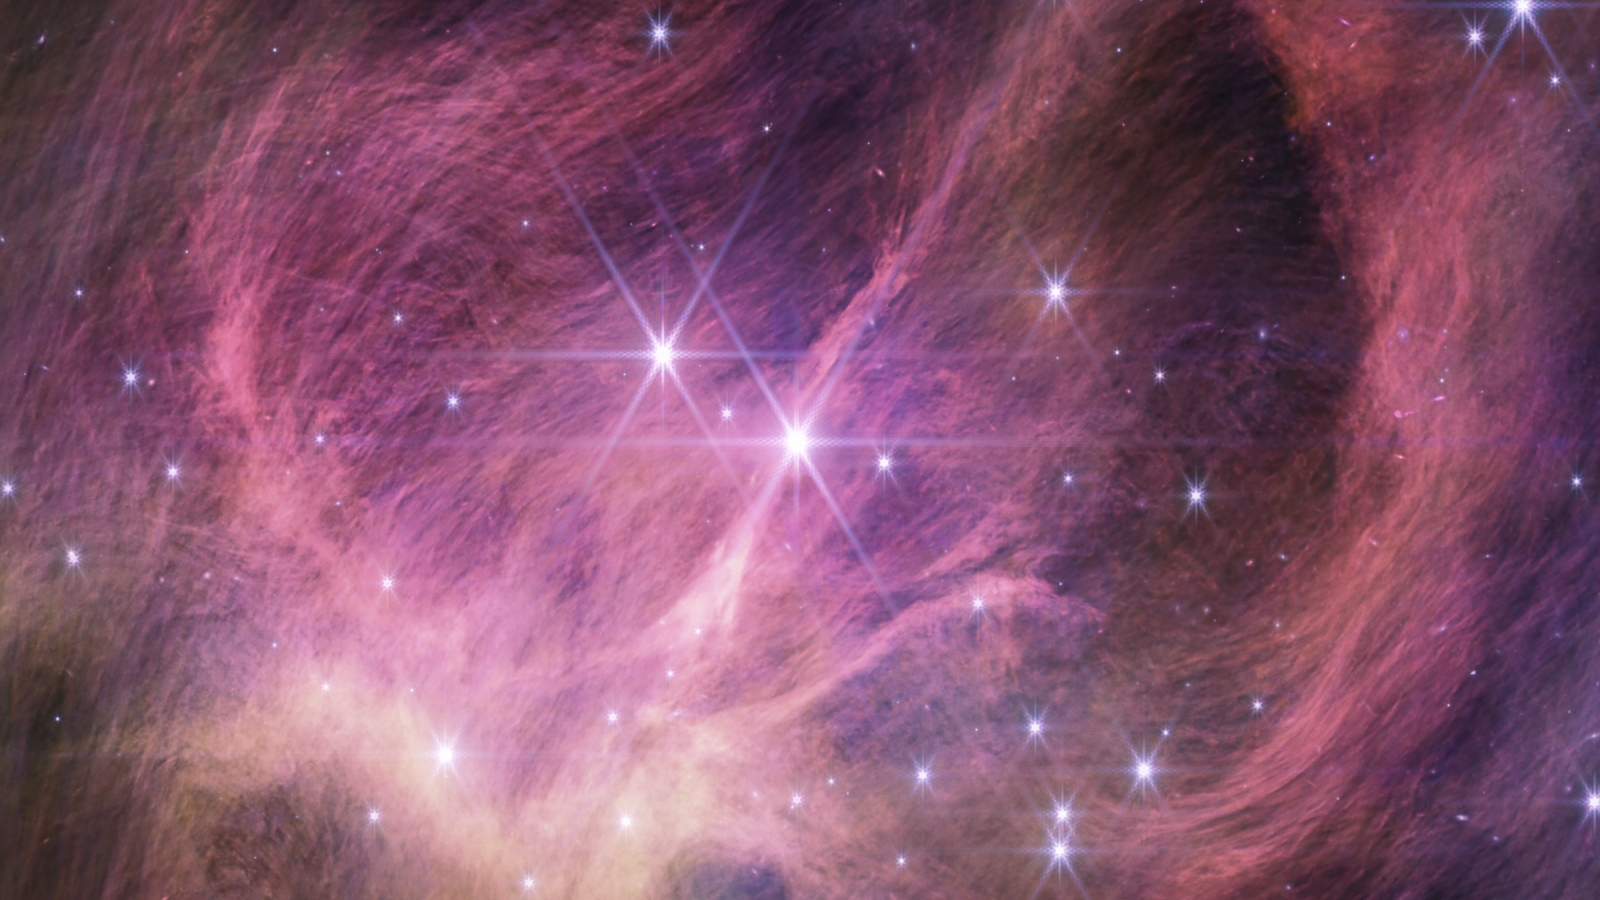 Pink and Gold nebulous Image from the NASA James Webb Space Telescope